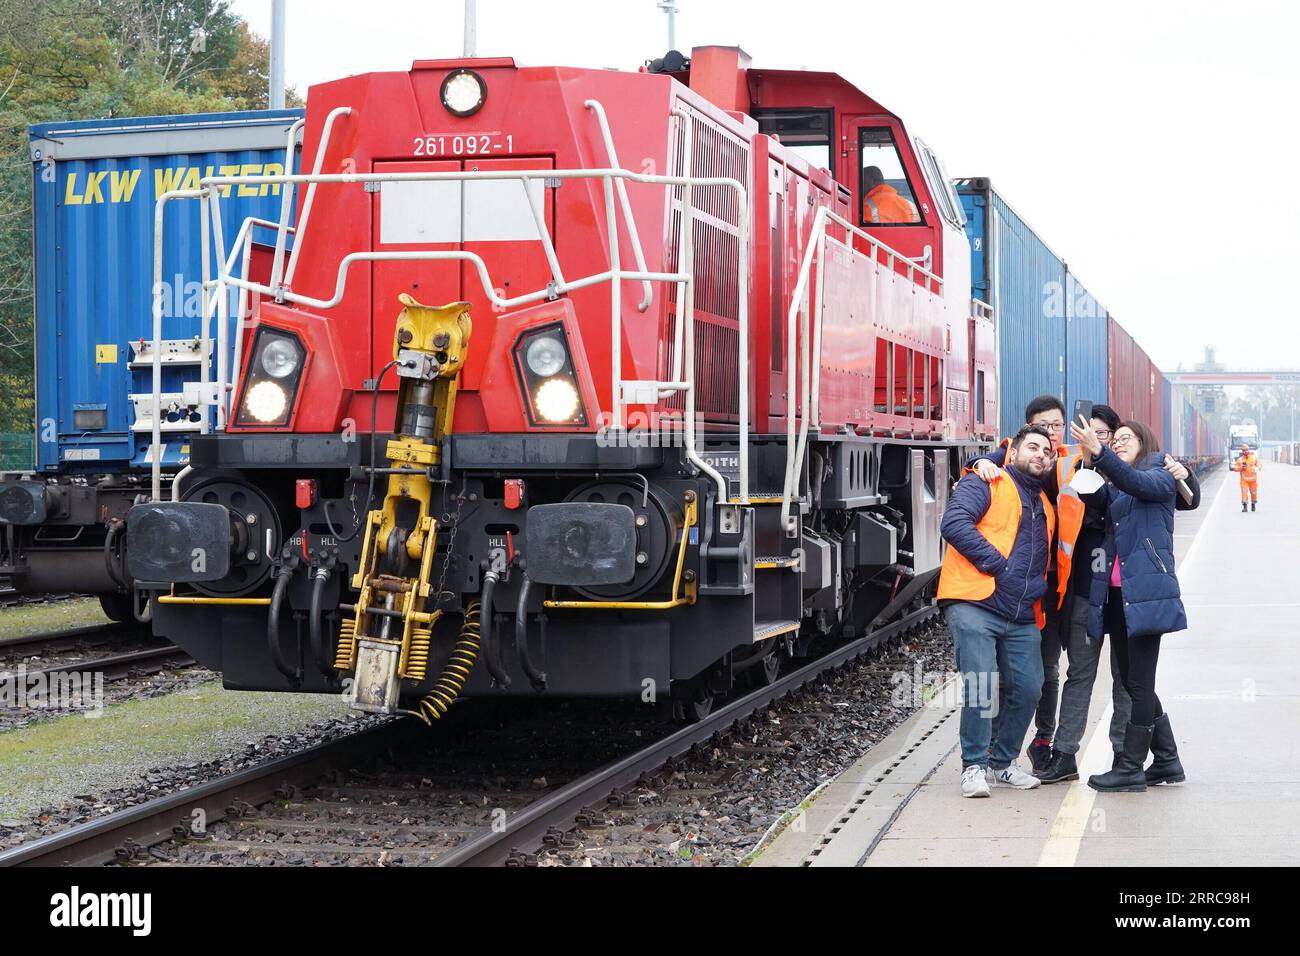 211027 -- HAMBURG, Oct. 27, 2021 -- Staff members pose for photos with the first Shanghai Express in Hamburg, Germany, on Oct. 26, 2021. The first Shanghai Express, carrying 50 containers loaded with apparel, auto parts and solar panels, traveled more than 10,000 km before arriving in northern Germany late on Monday. The China-Europe freight trains traveling along 73 routes have reached more than 170 cities in 23 European countries, since it was launched in 2011.  GERMANY-HAMBURG-CHINA-EUROPE FREIGHT TRAIN-ARRIVAL WangxQing PUBLICATIONxNOTxINxCHN Stock Photo